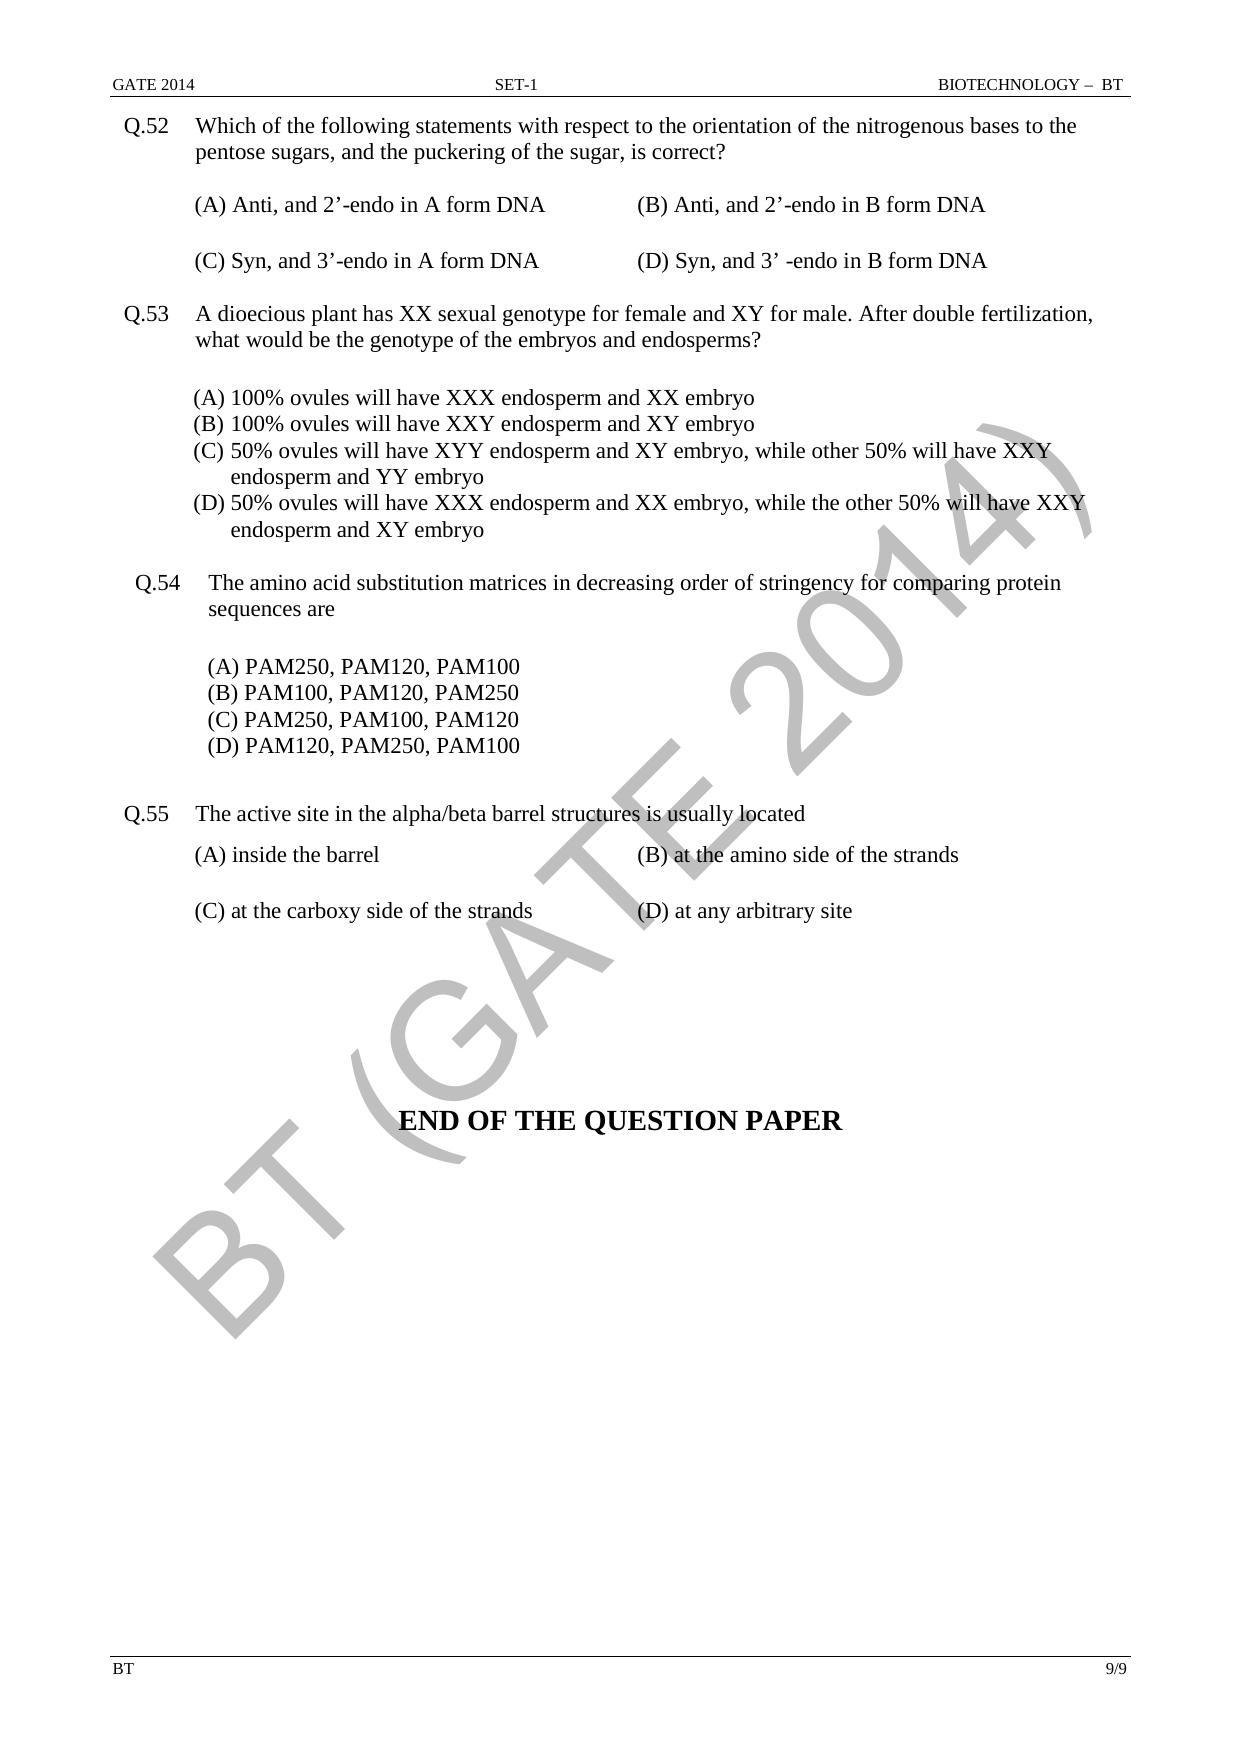 GATE 2014 Biotechnology (BT) Question Paper with Answer Key - Page 15